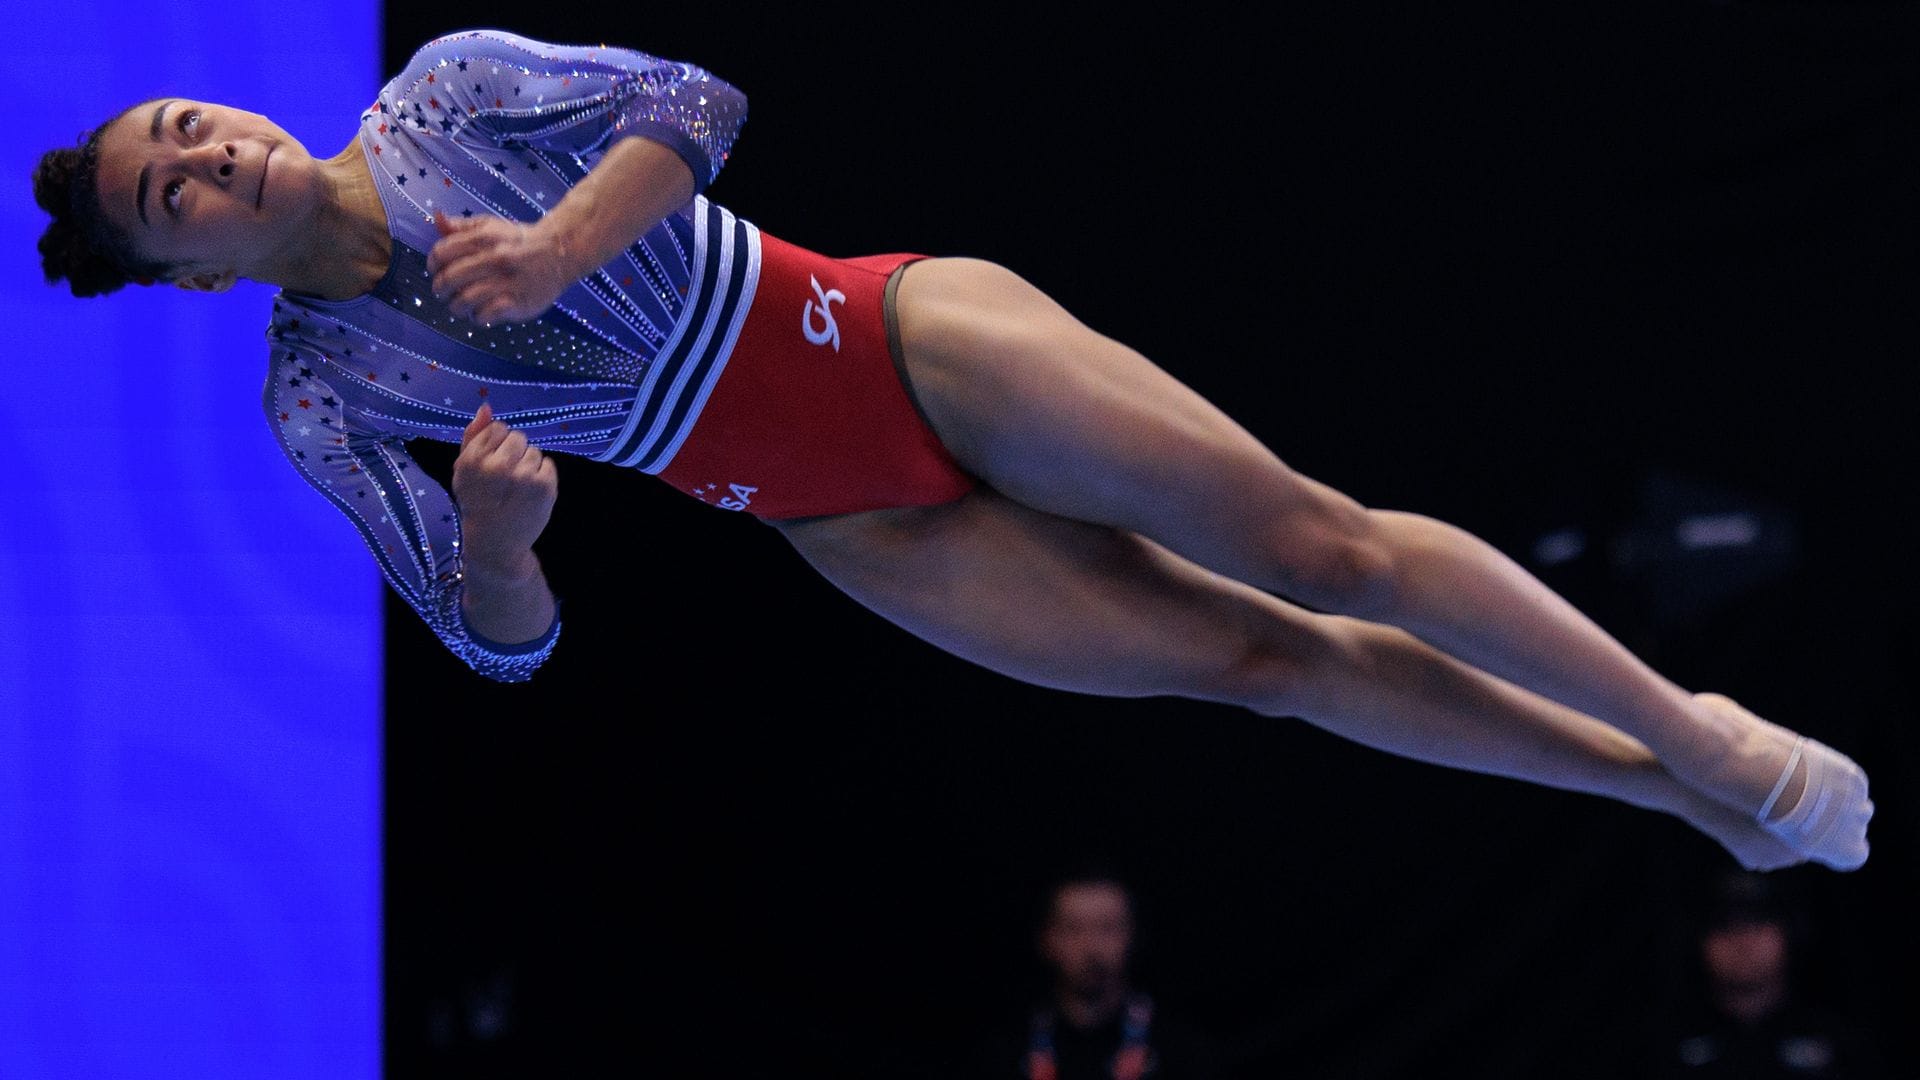 Who is Hezly Rivera? The 16-year-old Latina gymnast going to the Paris Olympics